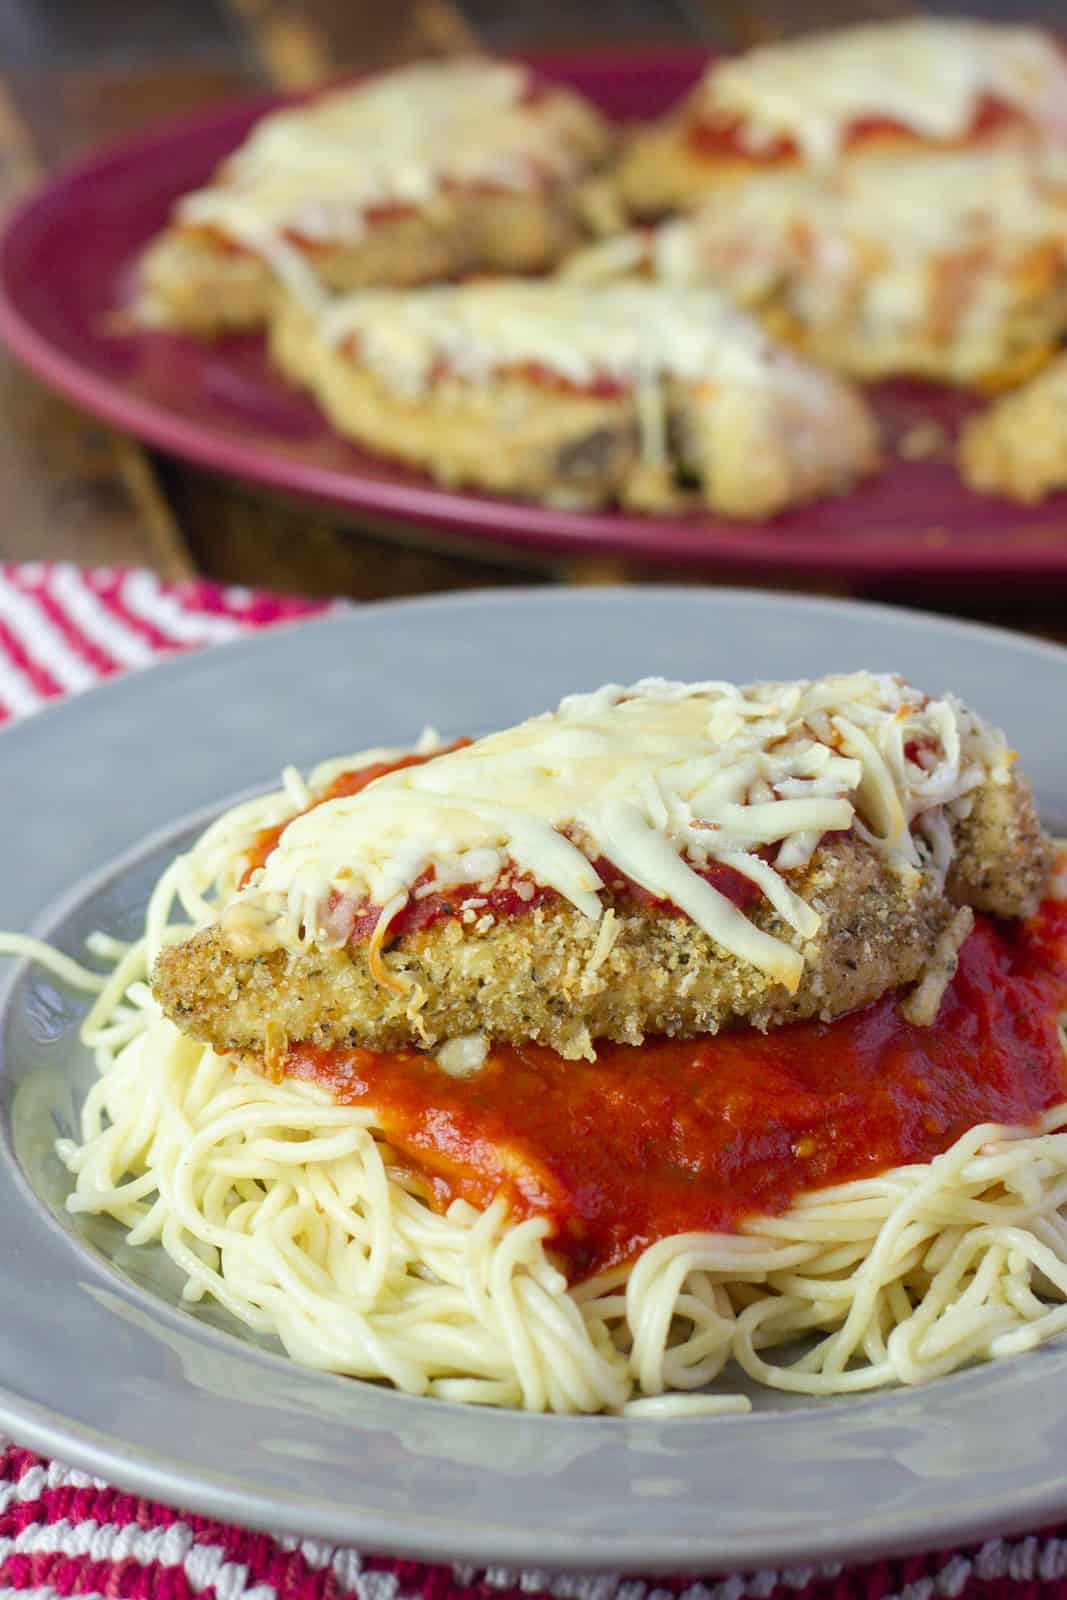 Baked chicken breast on a bed of pasta with sauce.